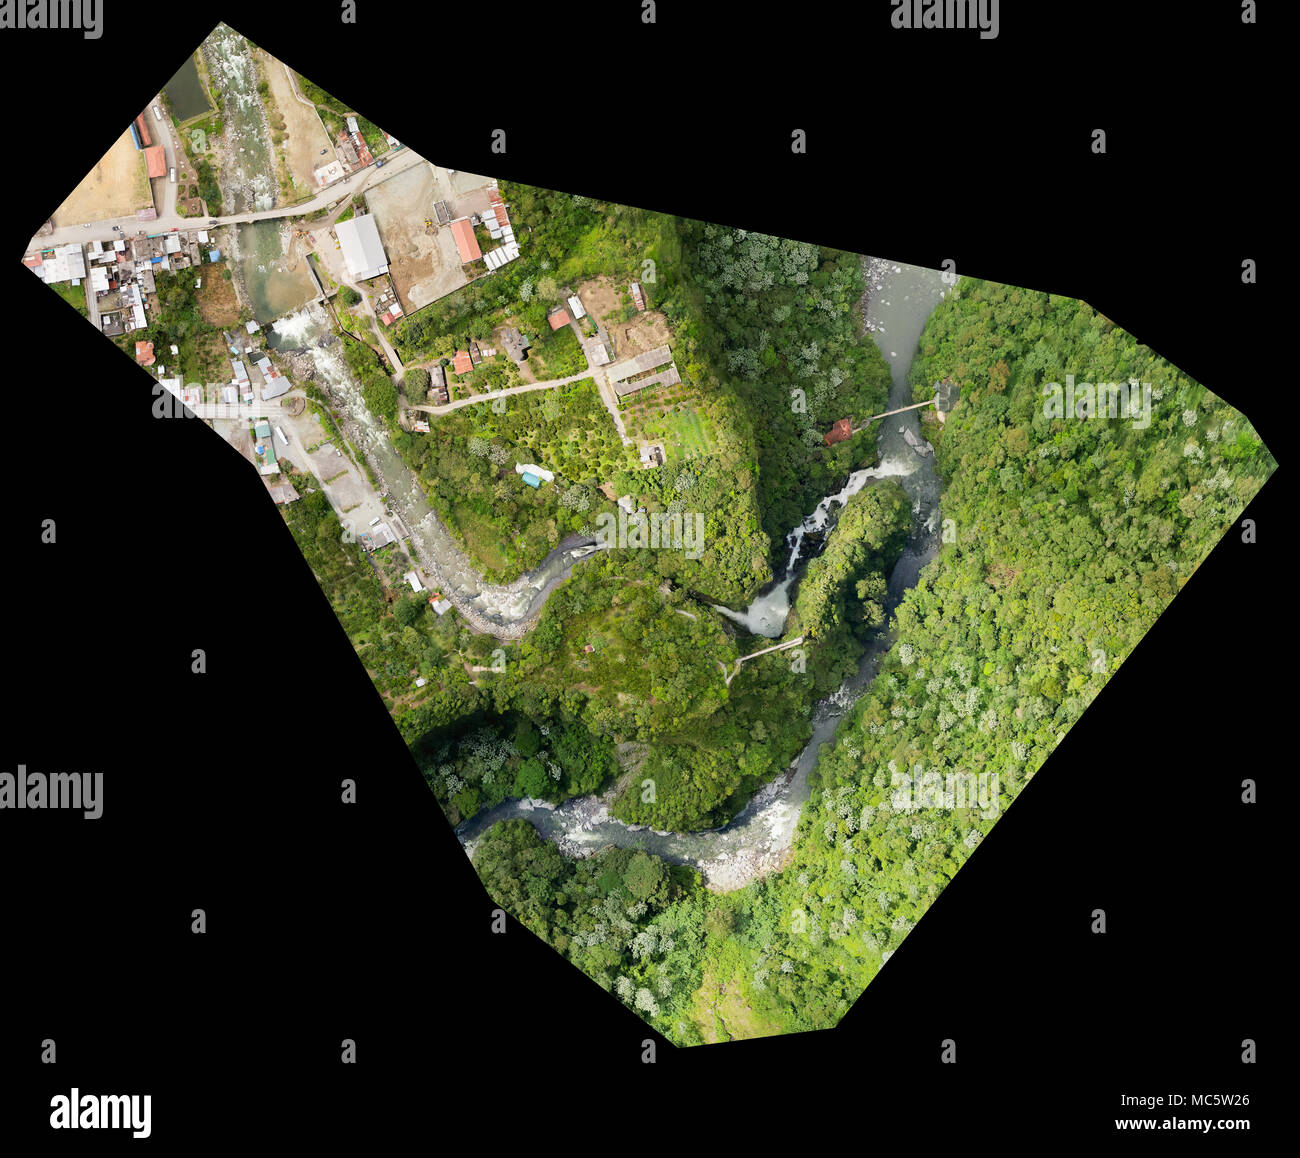 Orthorectified Drone Aerial Map Used In Photogrammetry Stock Photo